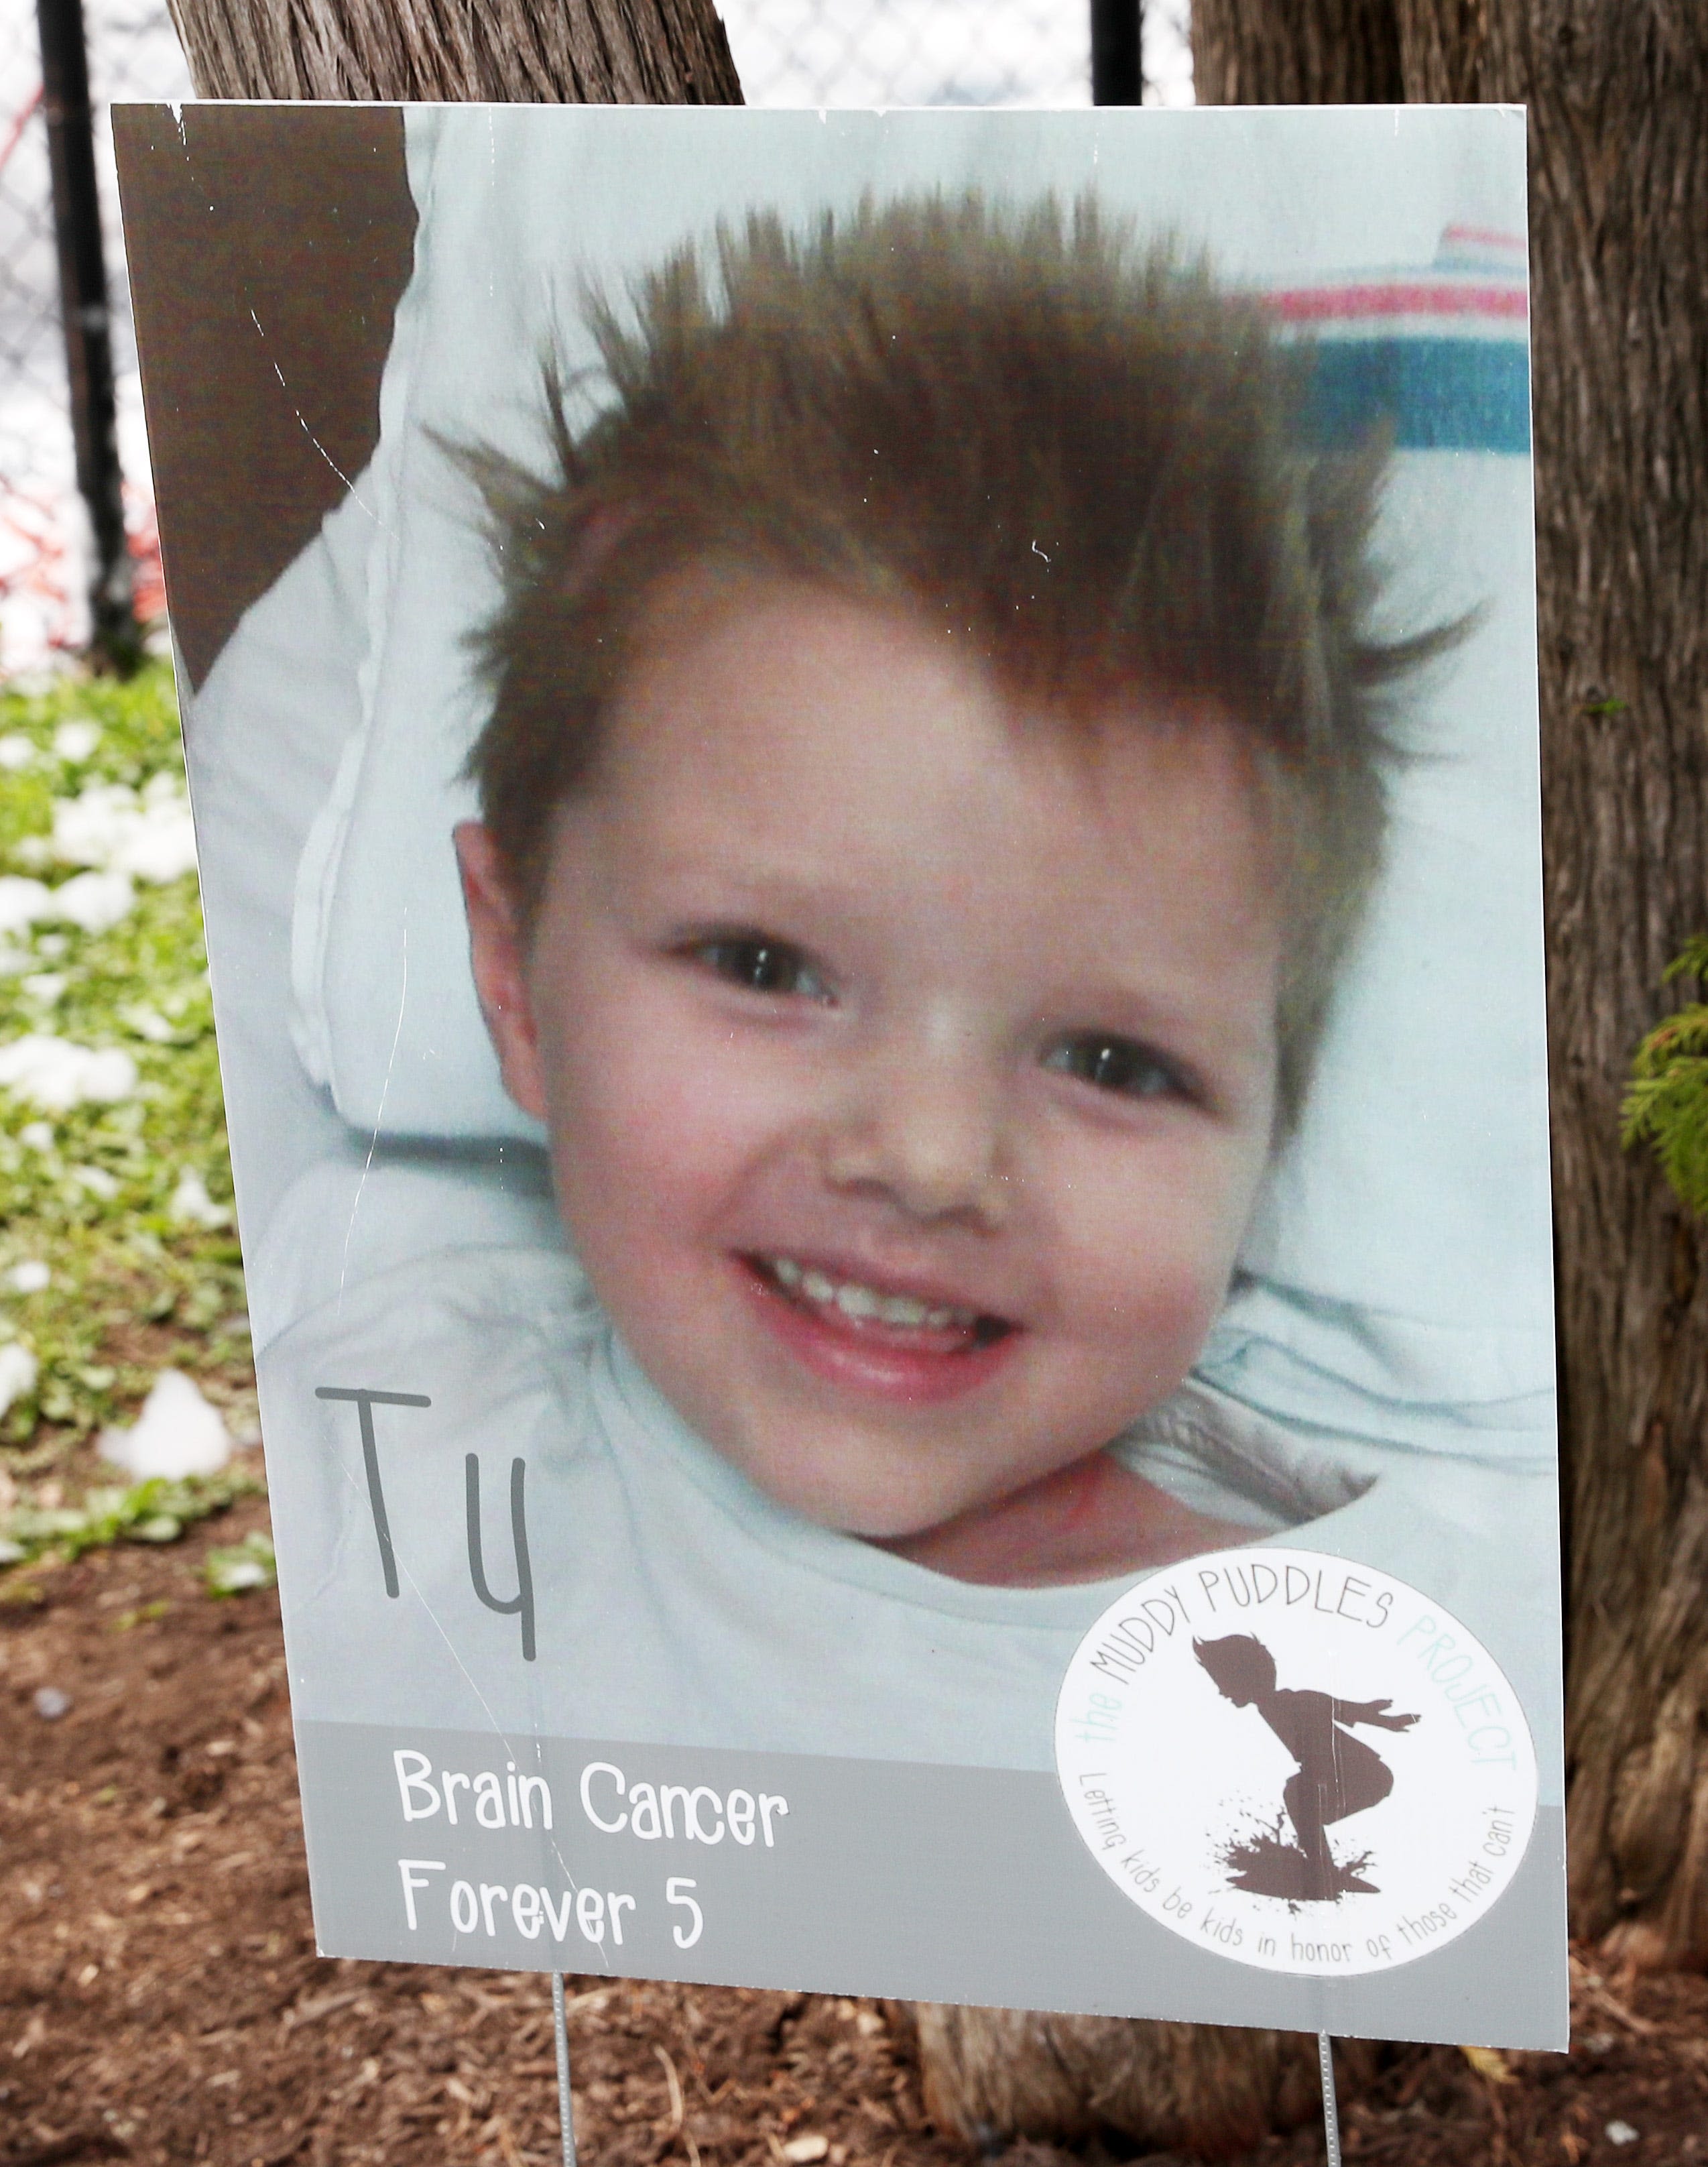 Muddy Puddles returns to raise money for childhood cancer research in honor of Ty Campbell